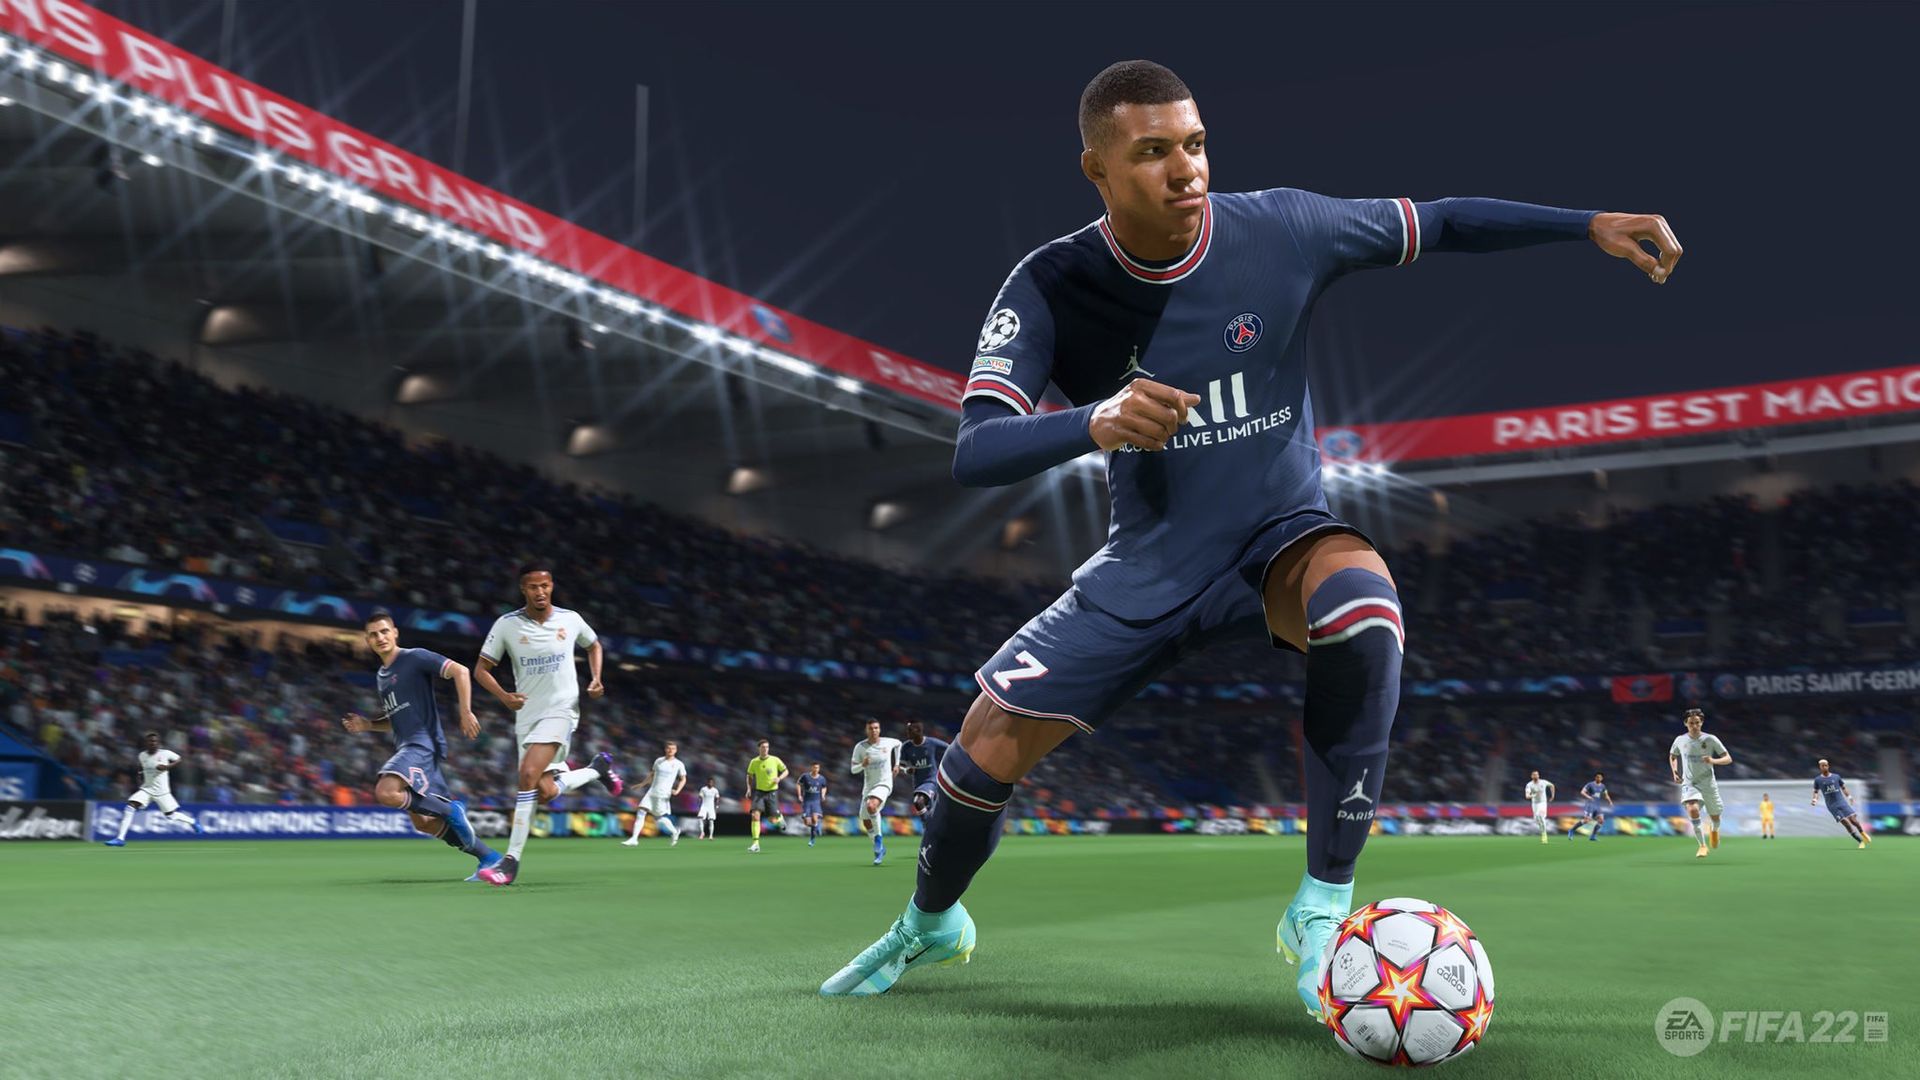 FIFA 22 crossplatform play is now live on Stadia and consoles